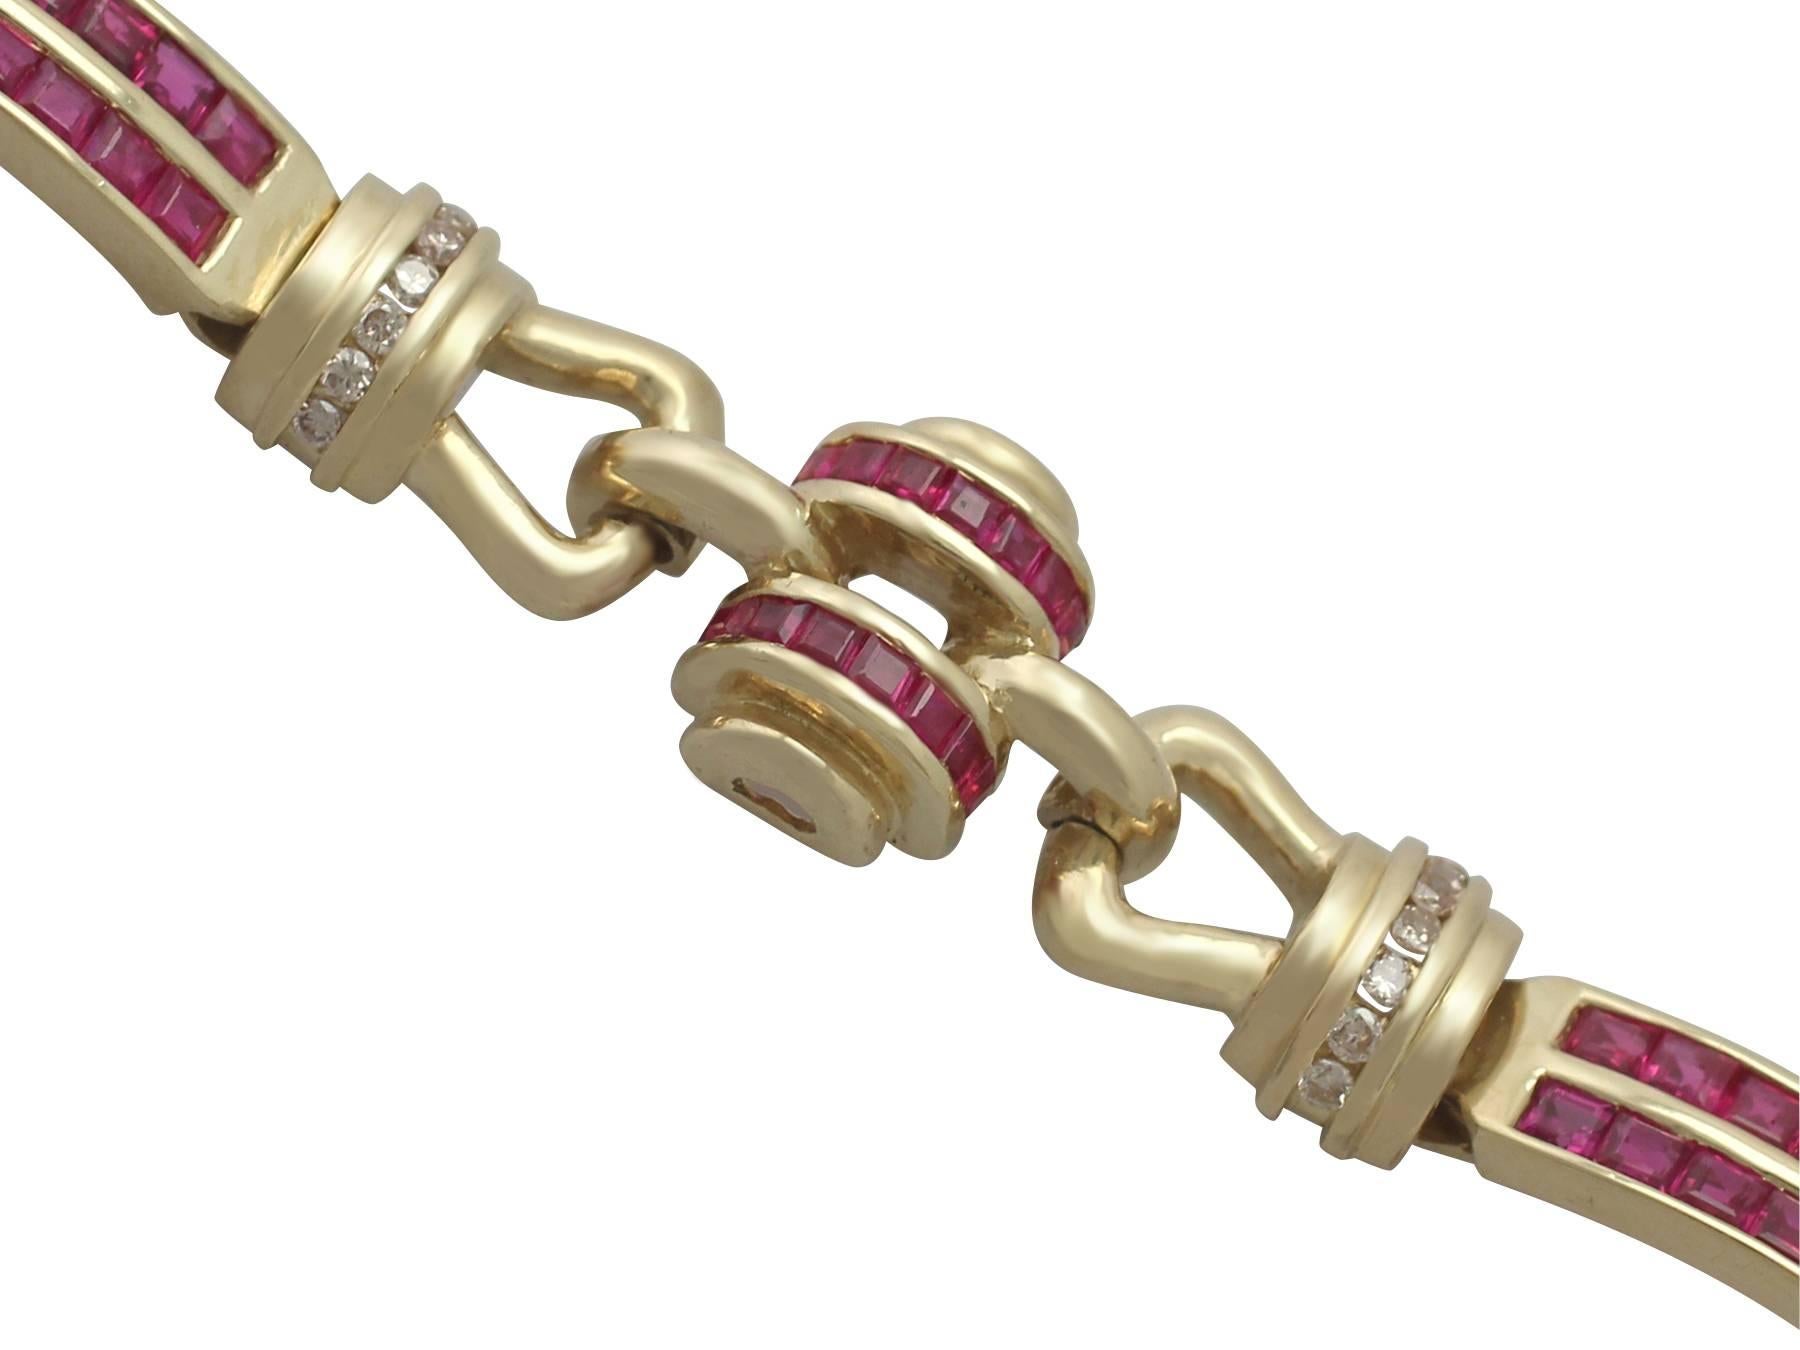 This exceptional, fine and impressive vintage ruby and diamond bracelet has been crafted in 18k yellow gold.

The typical Art Deco design consists of three longer links and three shorter links.

The longer links have an elongated, linear design